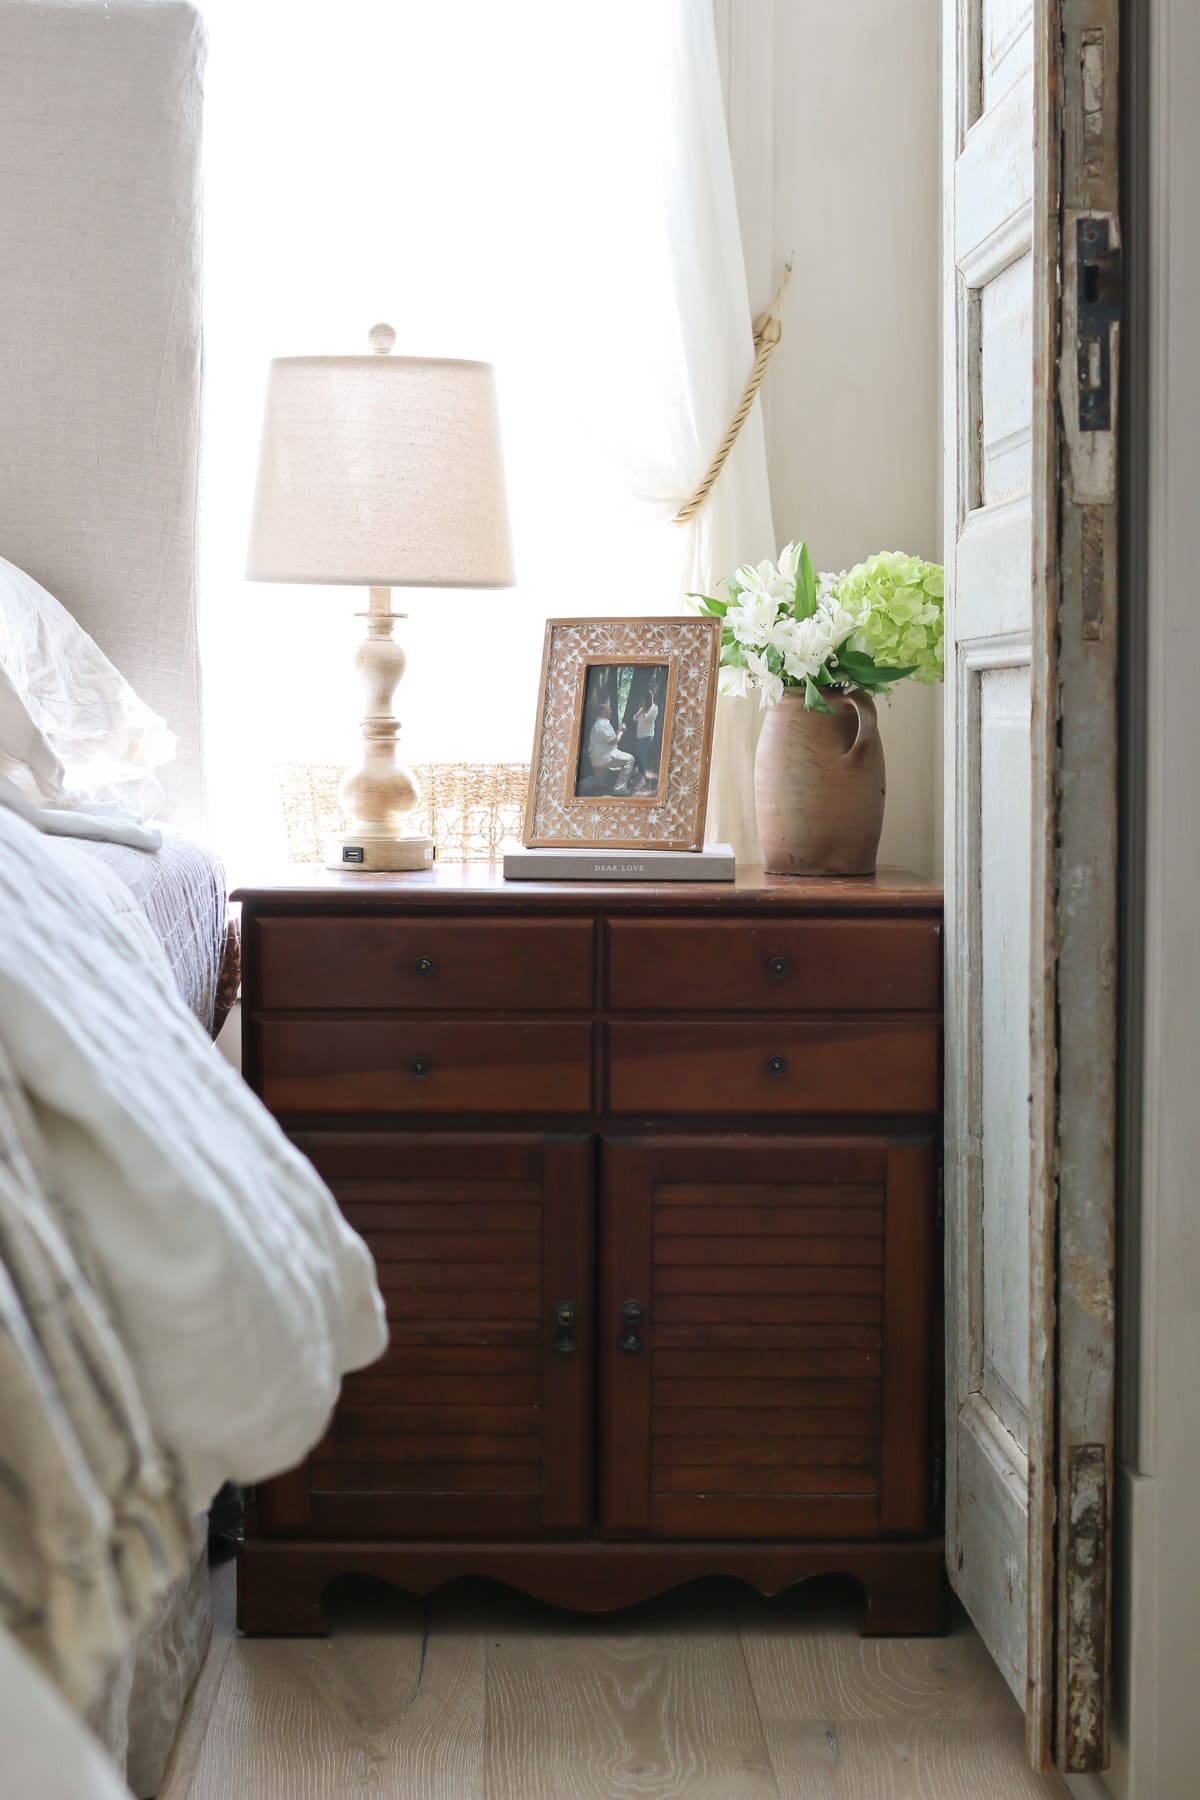 European farmhouse master bedroom with antique nightstand